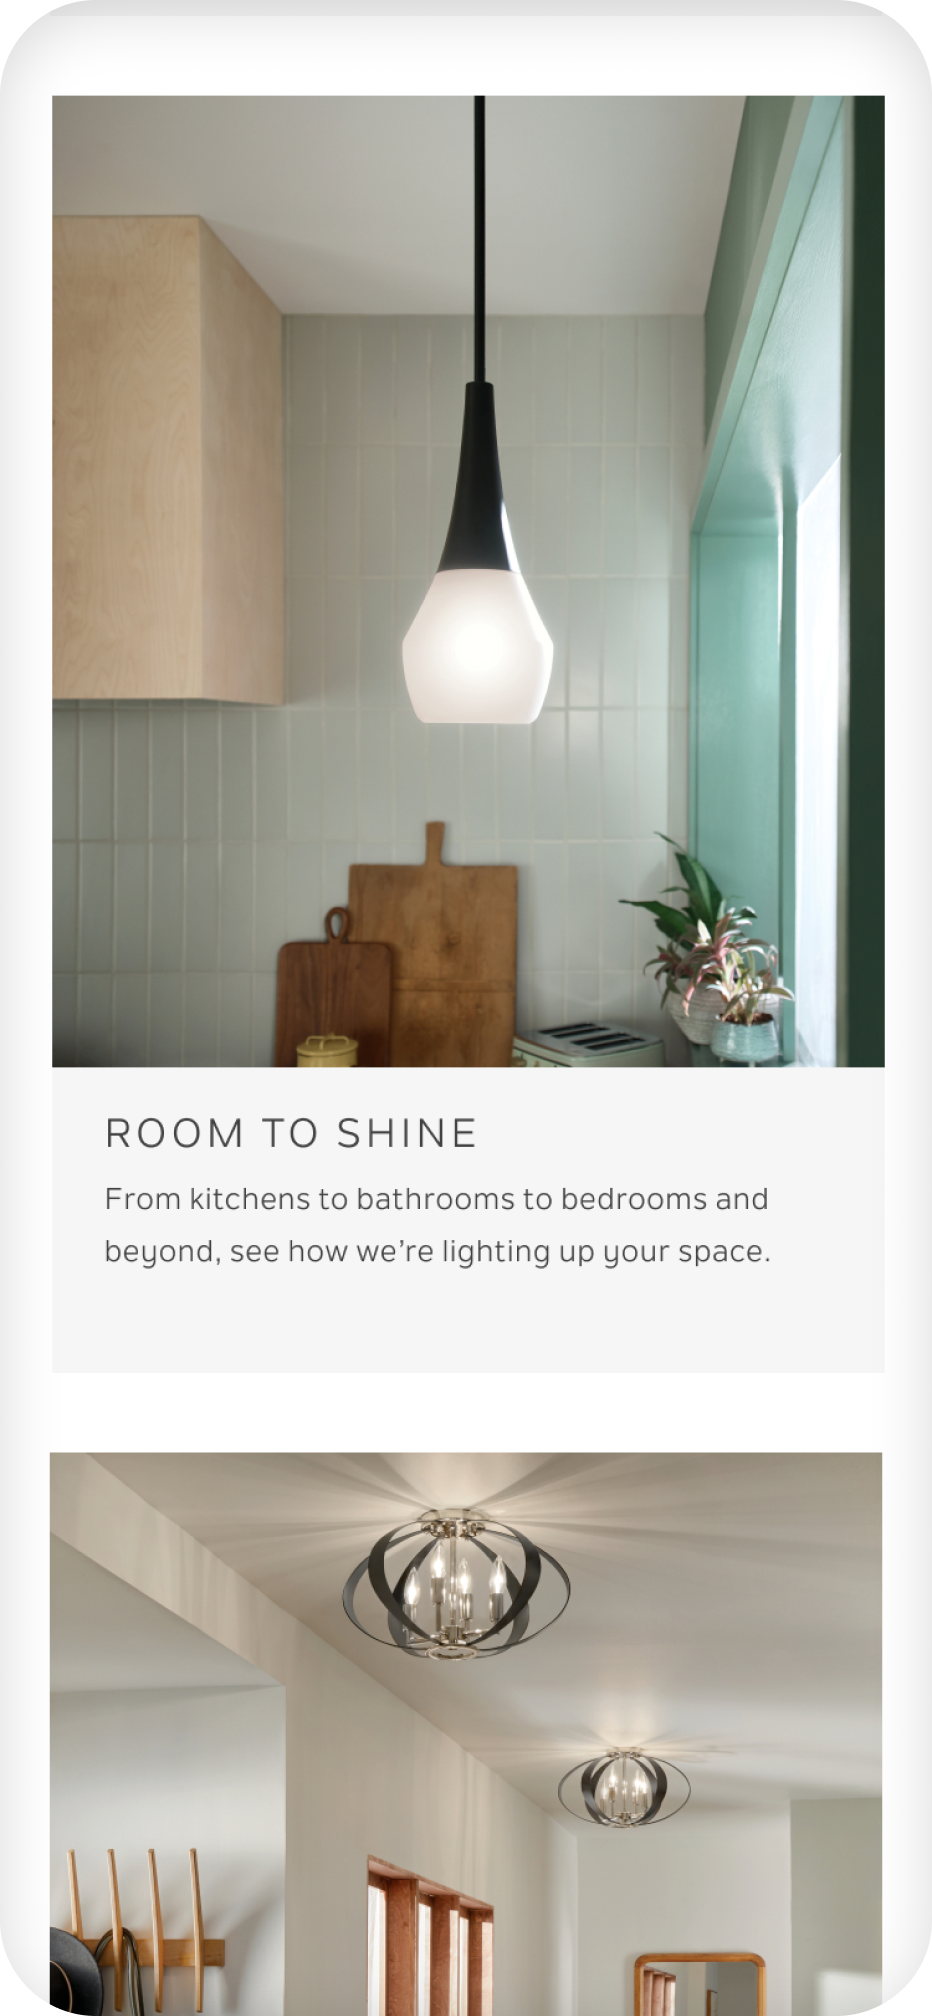 homepage product attributes titled "Room to Shine"